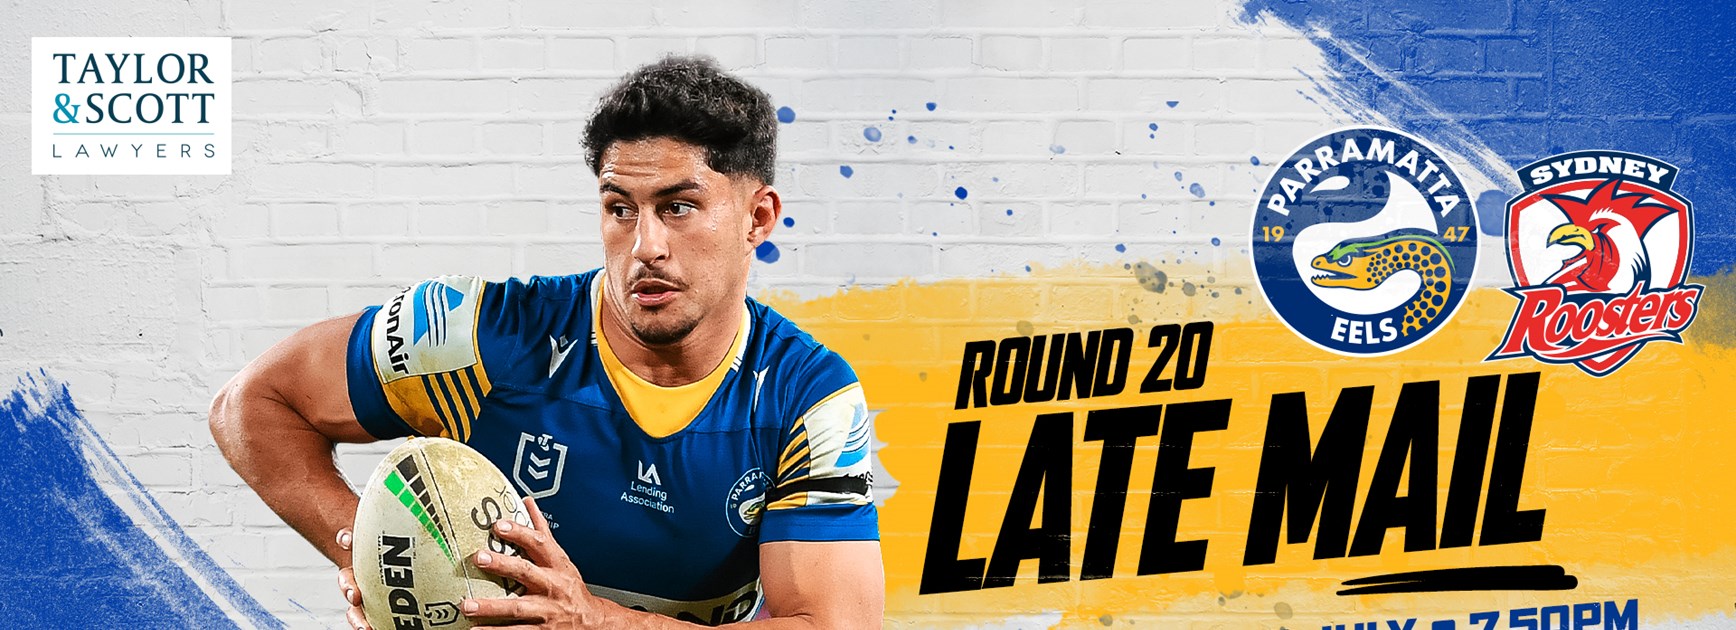 Late Mail - Roosters v Eels, Round 20